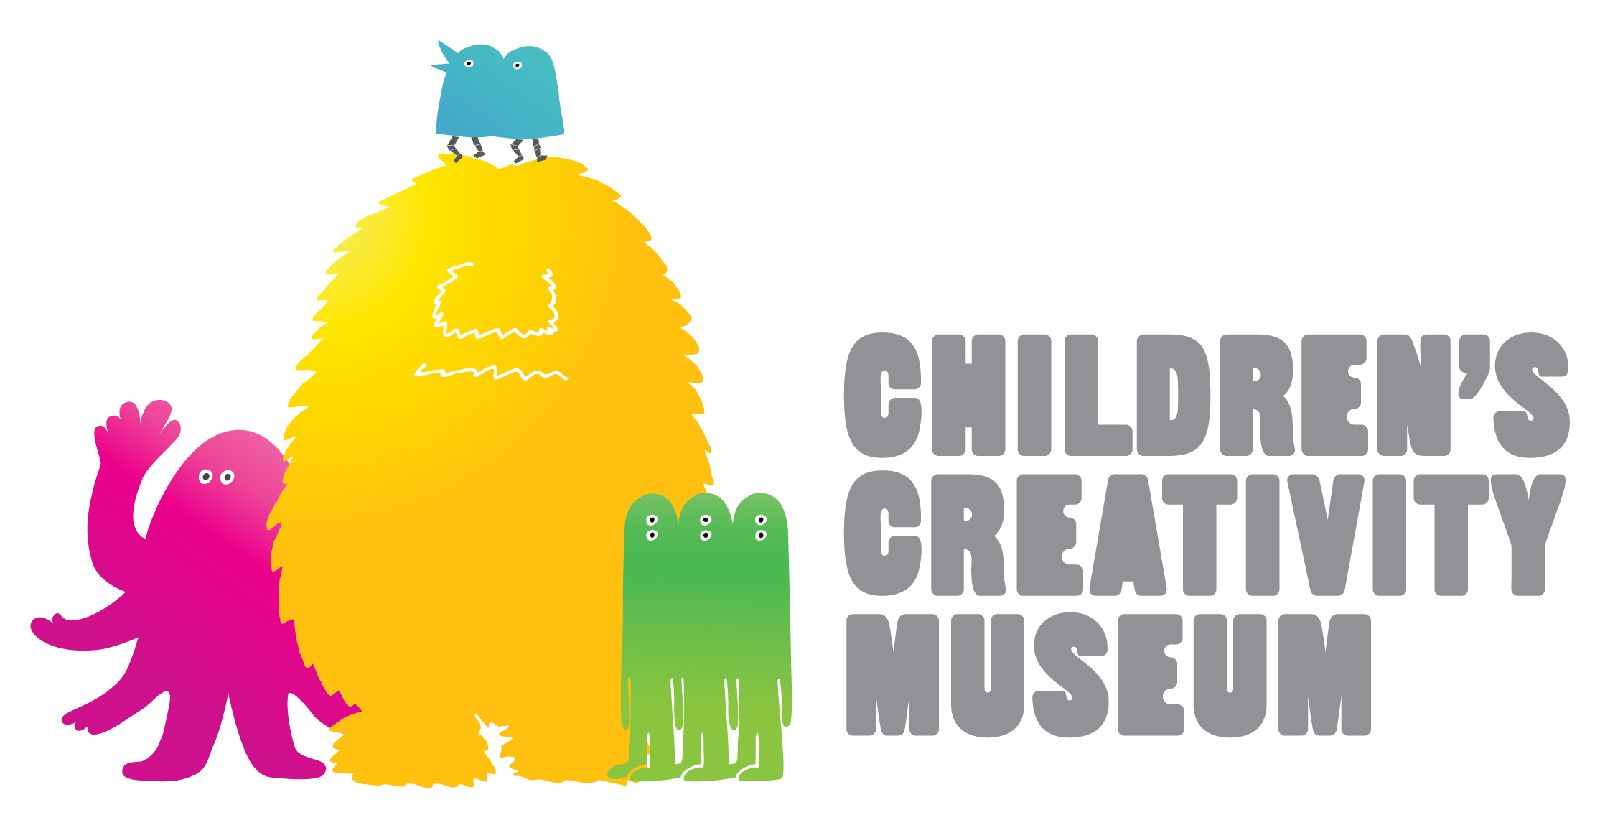 The Children's Creativity Museum logo features multicolored, harmless-looking monsters.